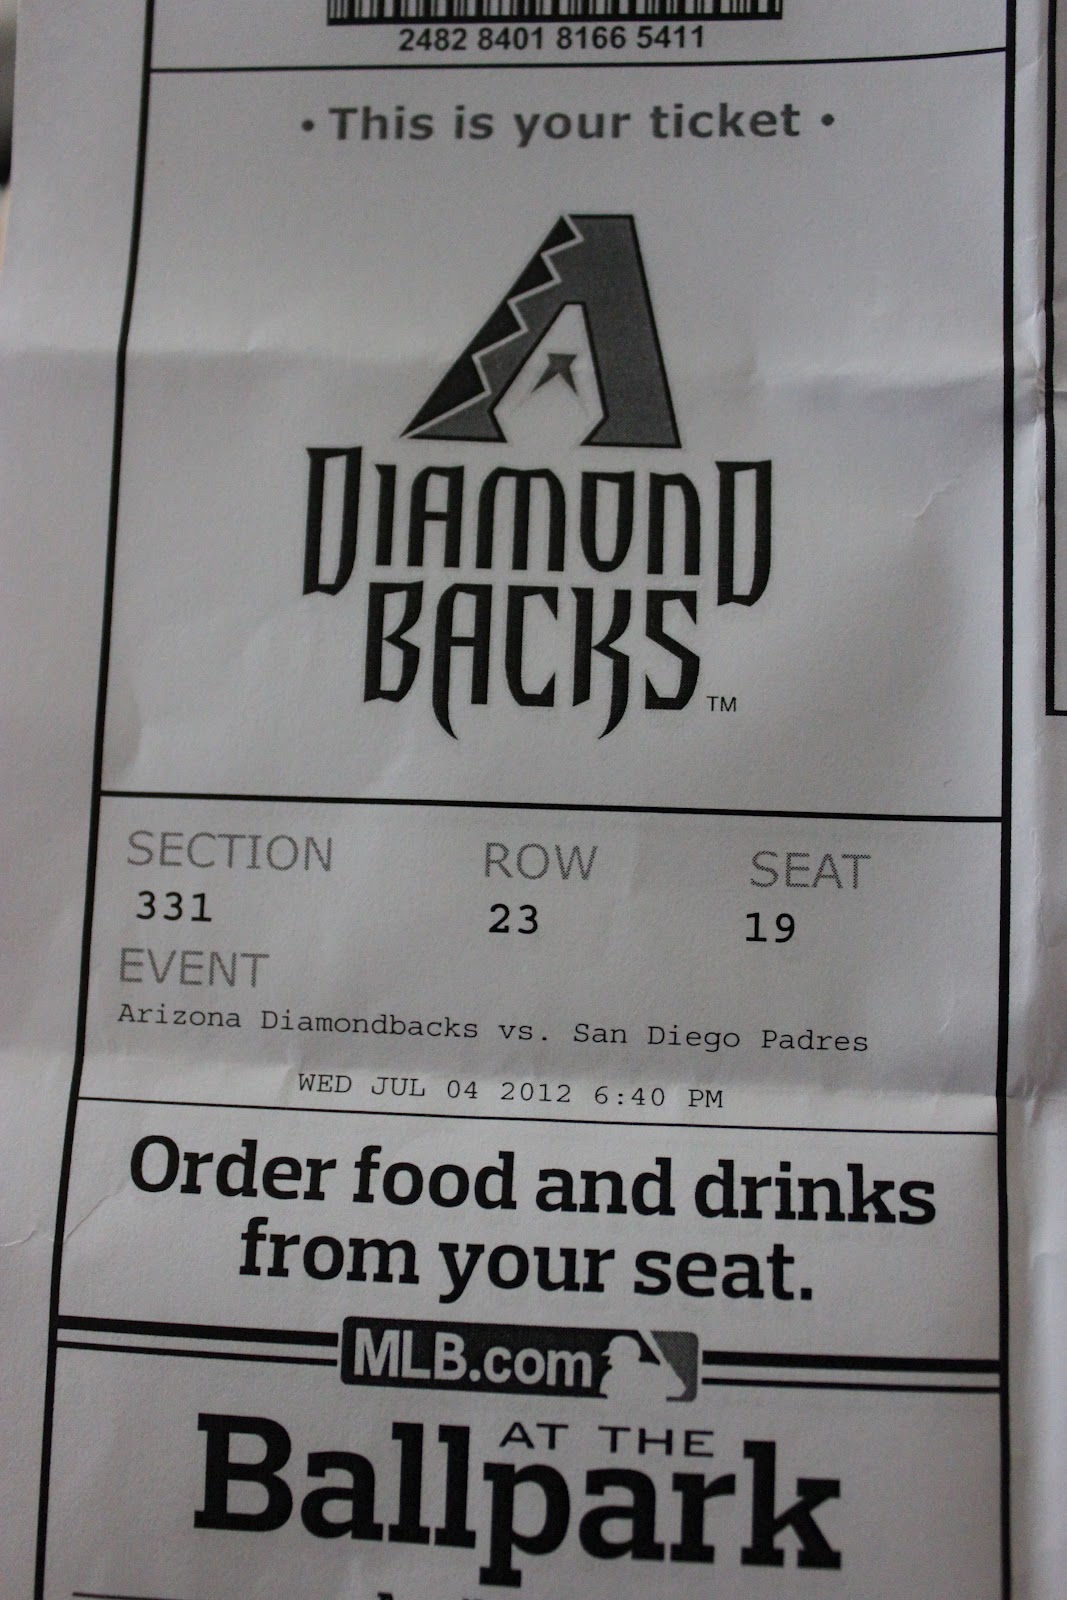 Tickets for a Diamondbacks baseball game on the 4th of July. 